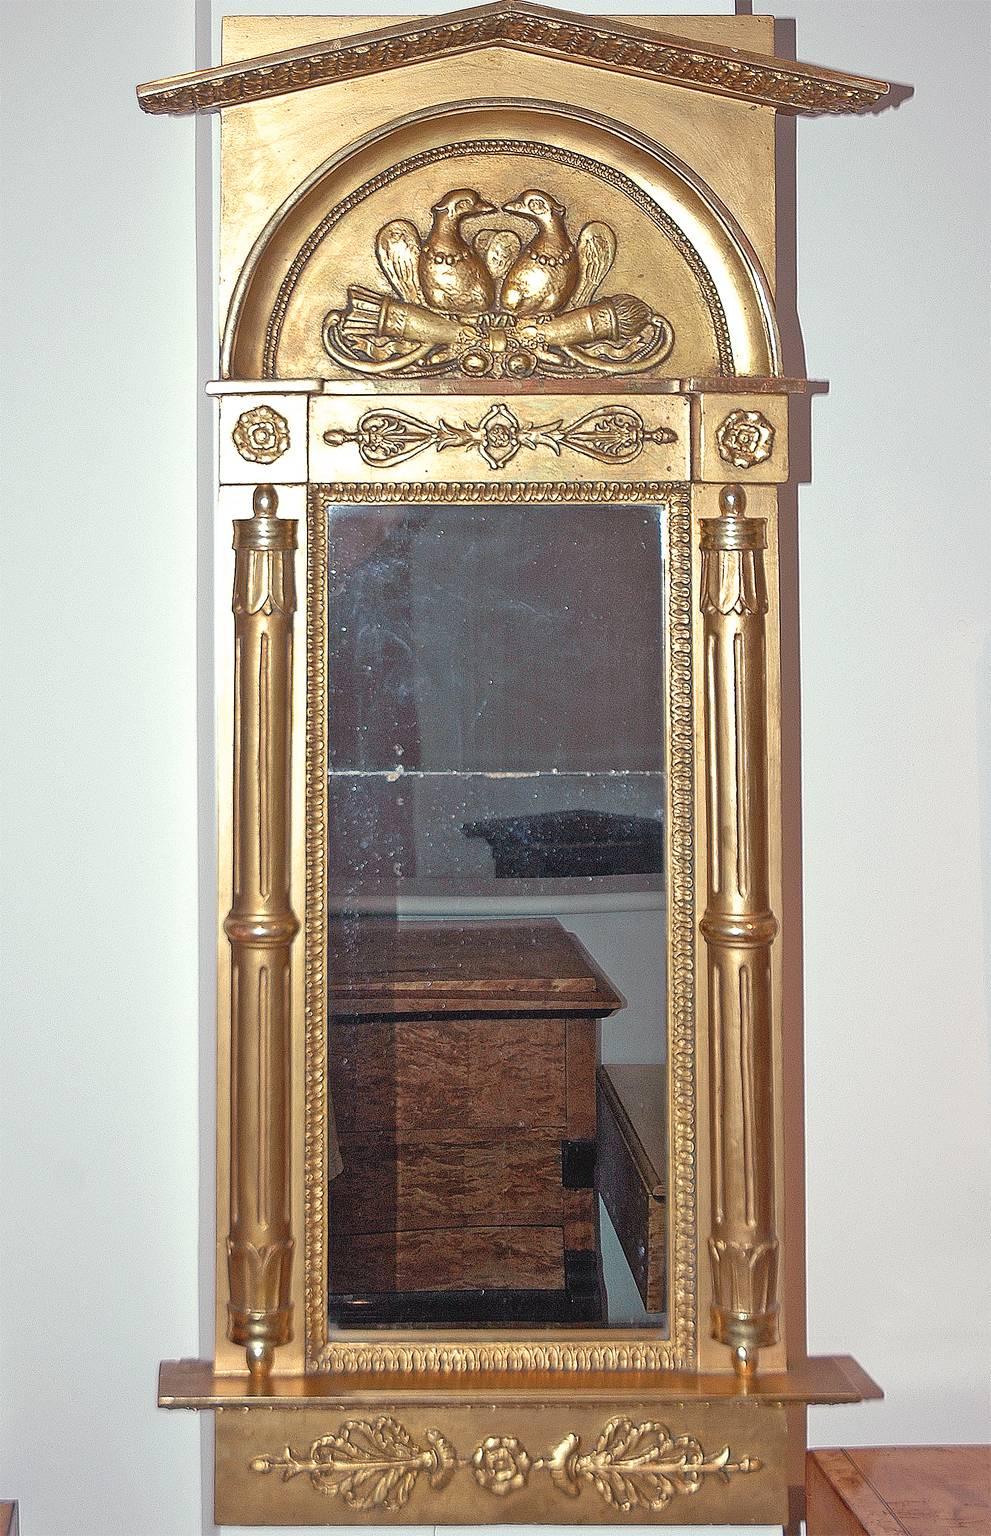 Karl Johan Empire gilded mirror with original silvered glass, Stockholm stamped 1827.
Measures: 22 1/2